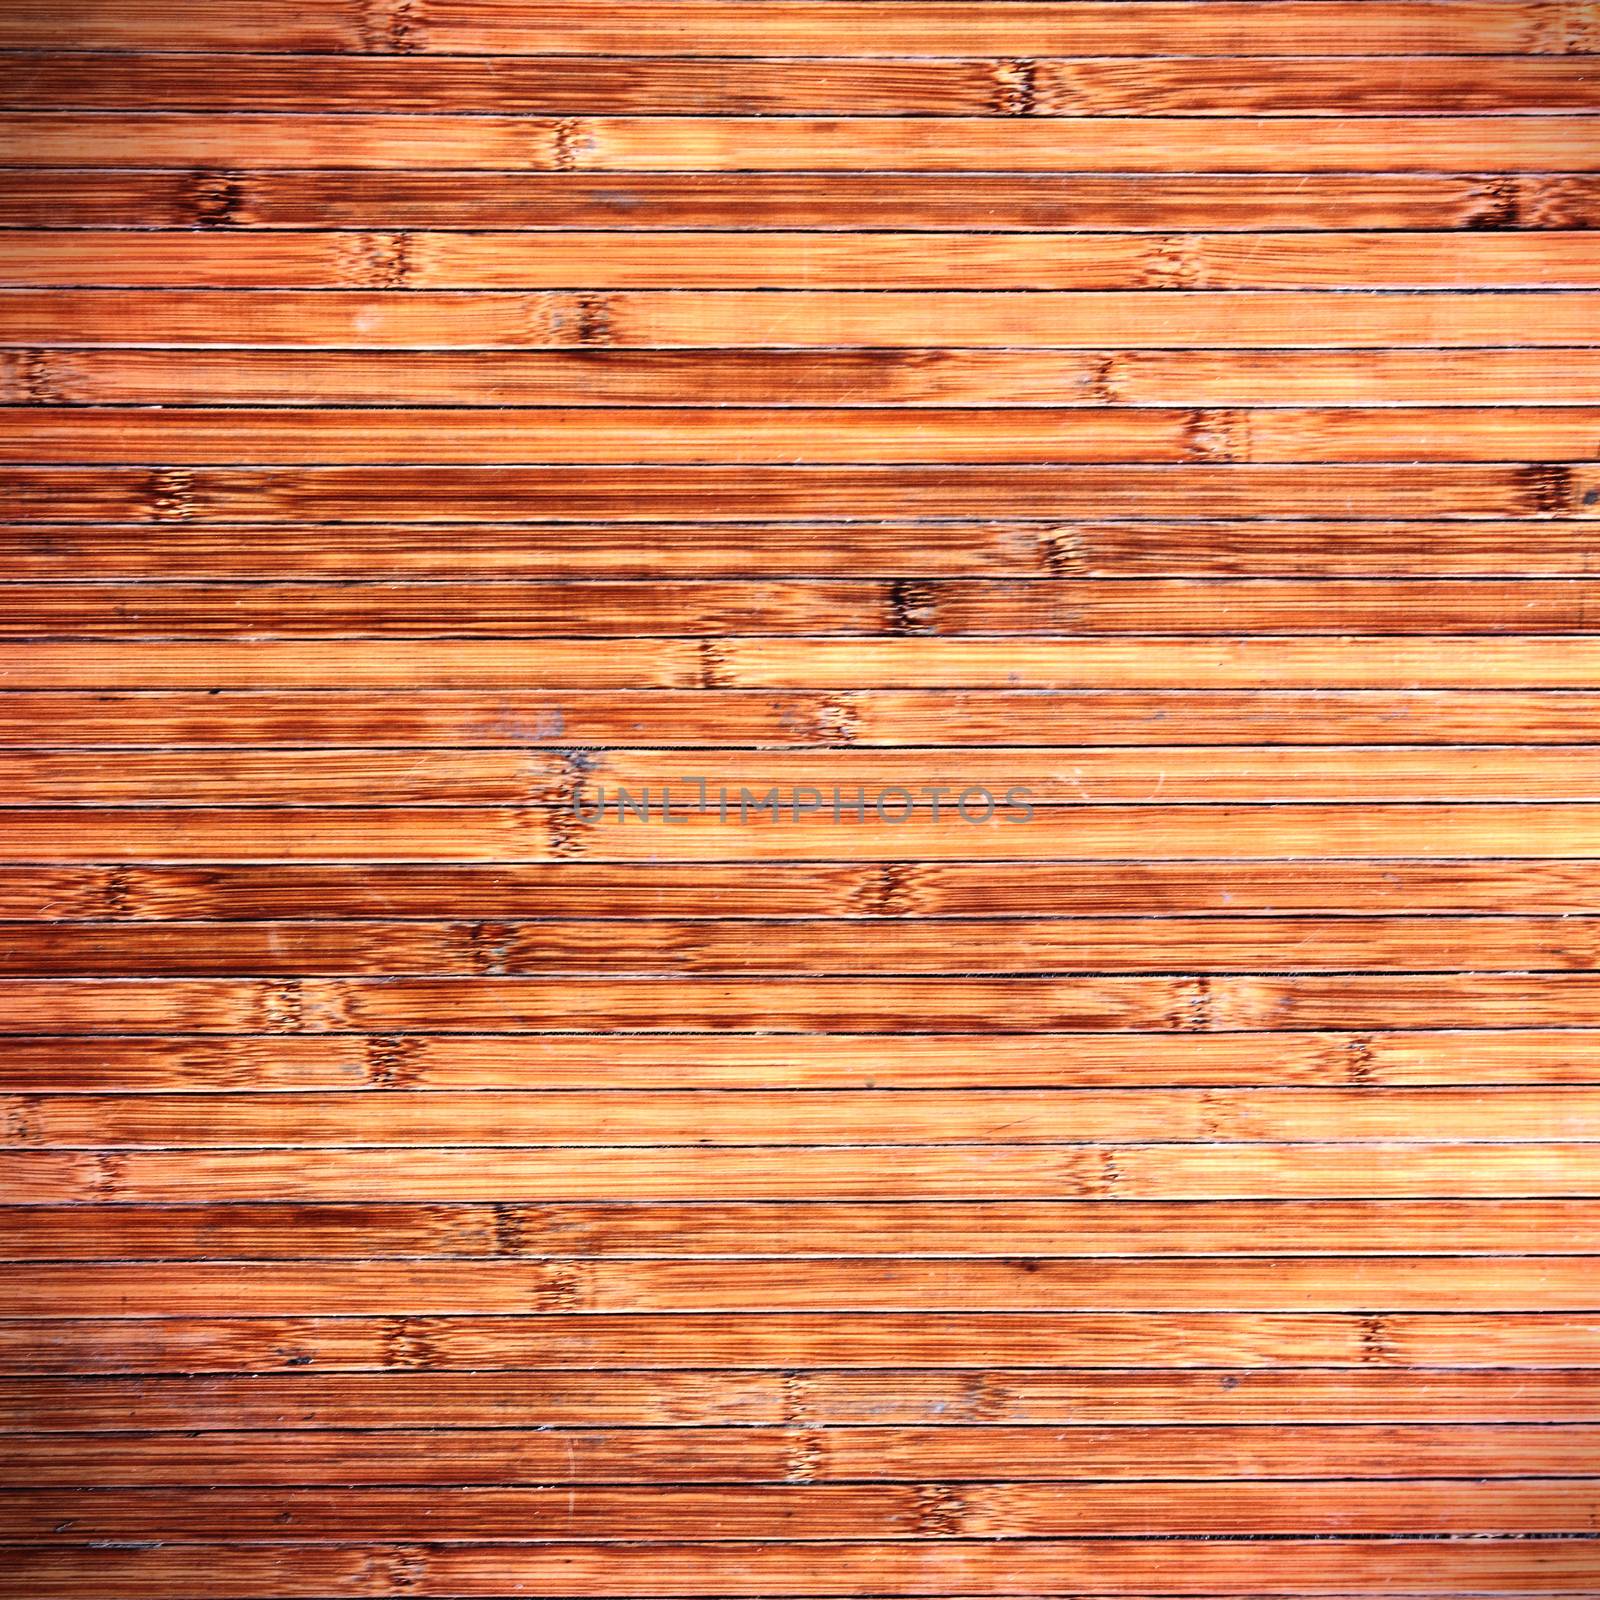 Bamboo texture for background